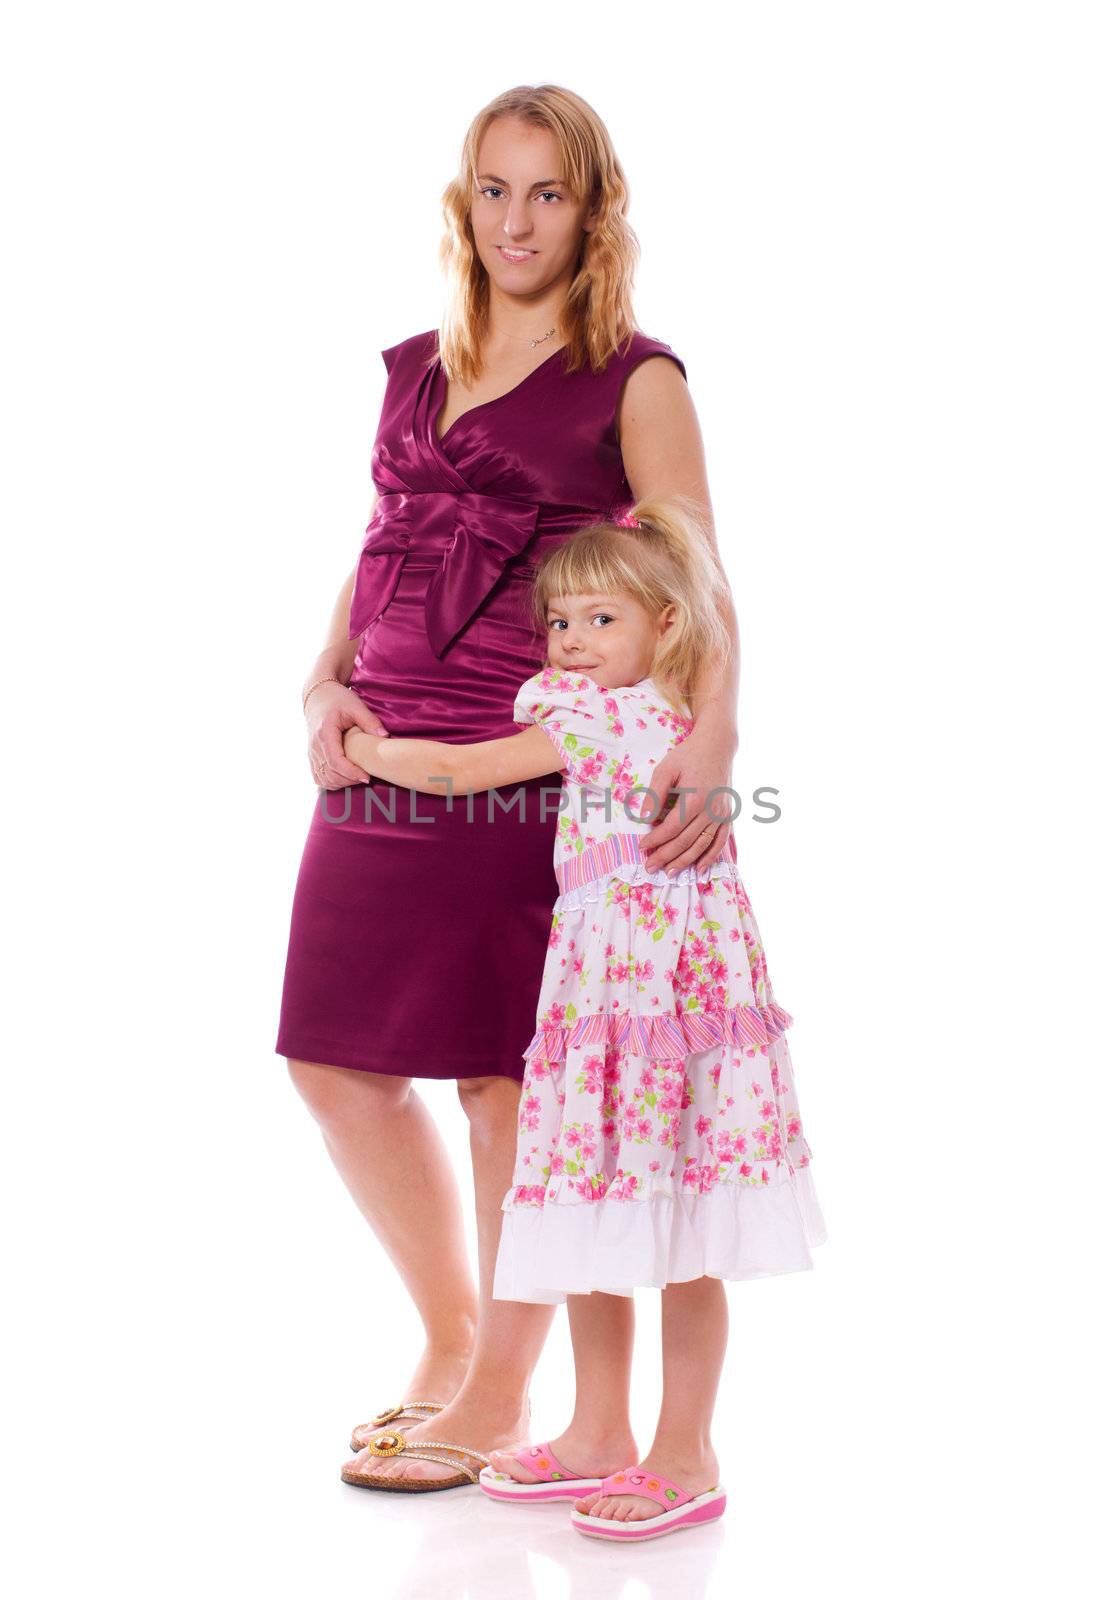 Mother with daughter standing together isolated on white